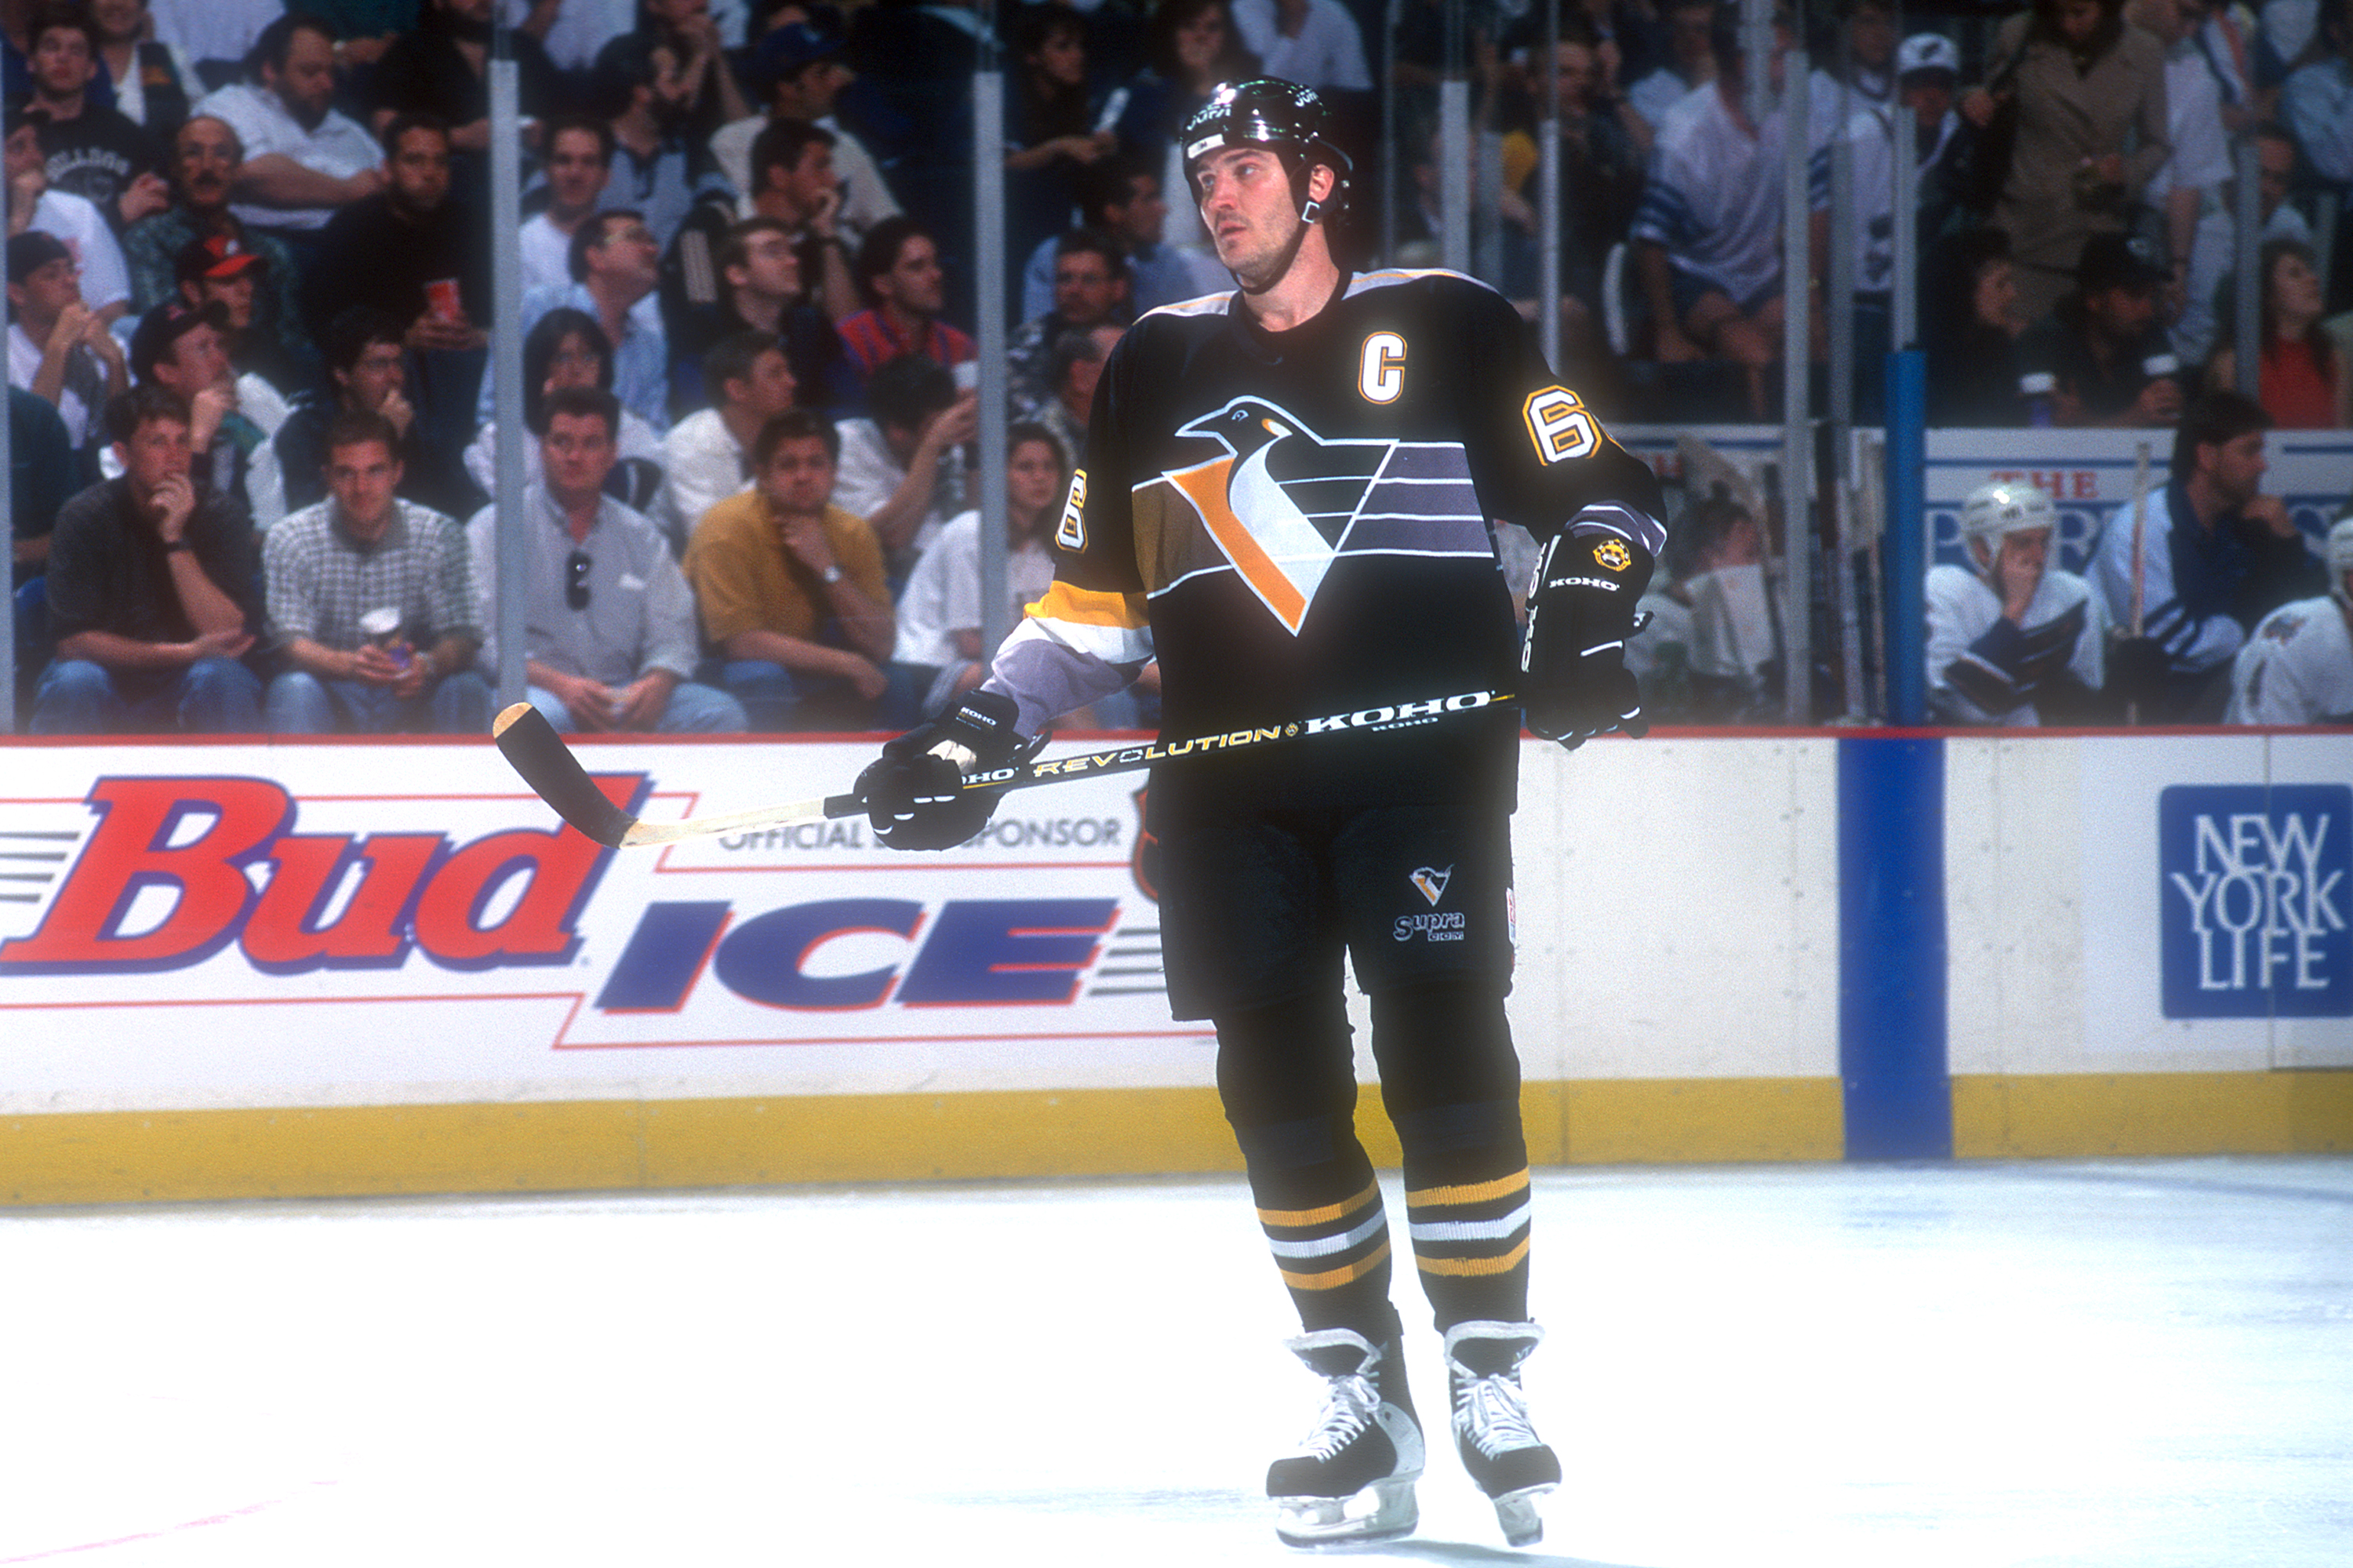 The Penguins’ Mario Lemieux Played for the Team After Buying It Out of Bankruptcy